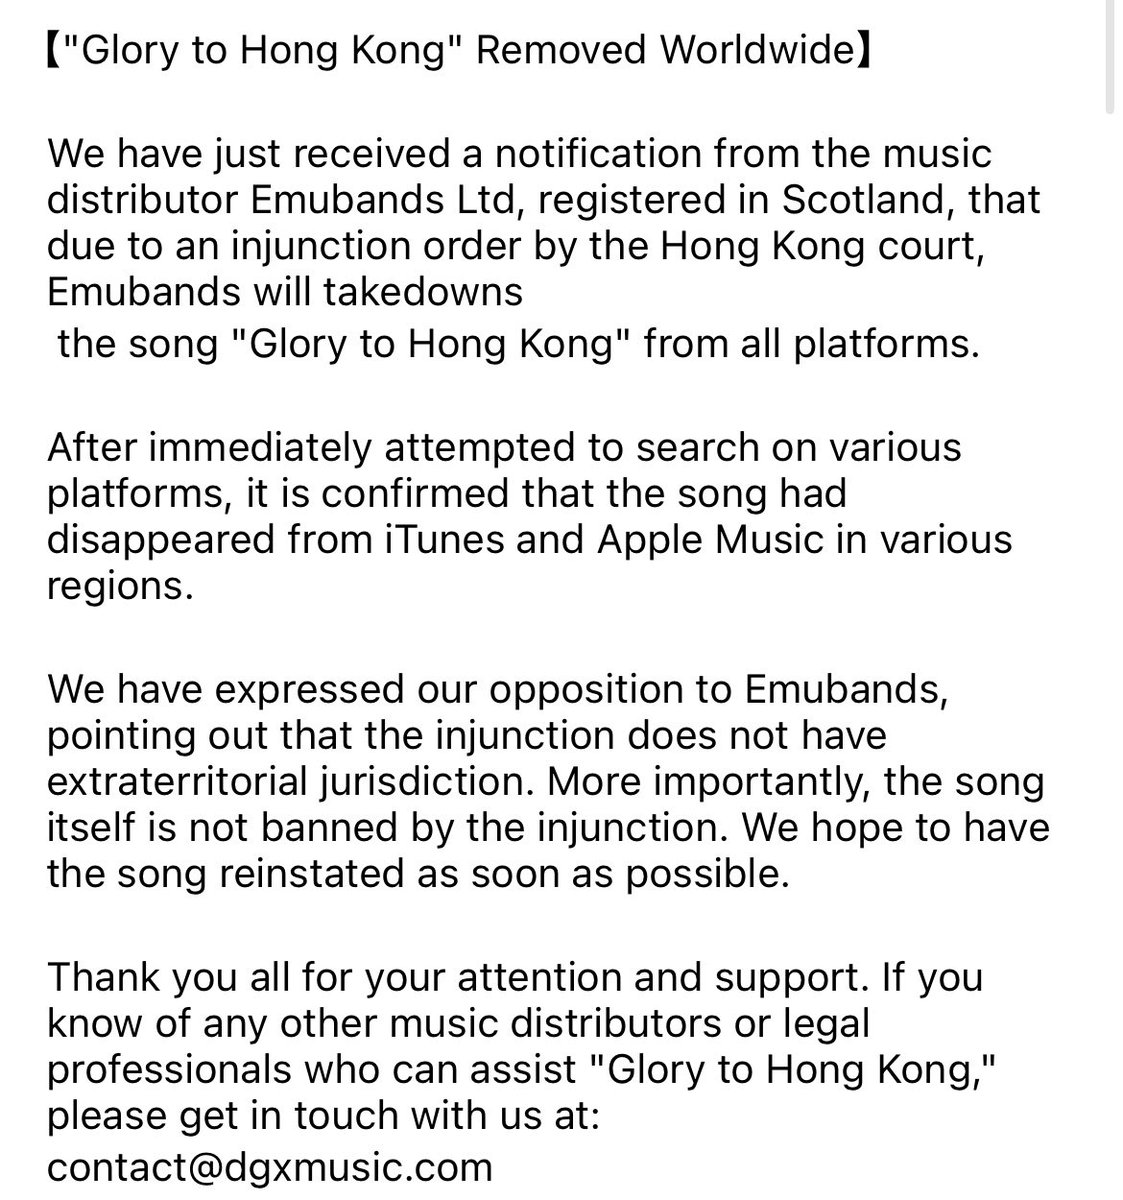 🚨 BREAKING: “Glory to #HongKong”has just been removed from music platforms @Spotify and @AppleMusic by the distributor @EmuBands, a company registered in #Scotland. @EmuBands said they will take down the song from all platforms due to an injunction order by the #HongKong court